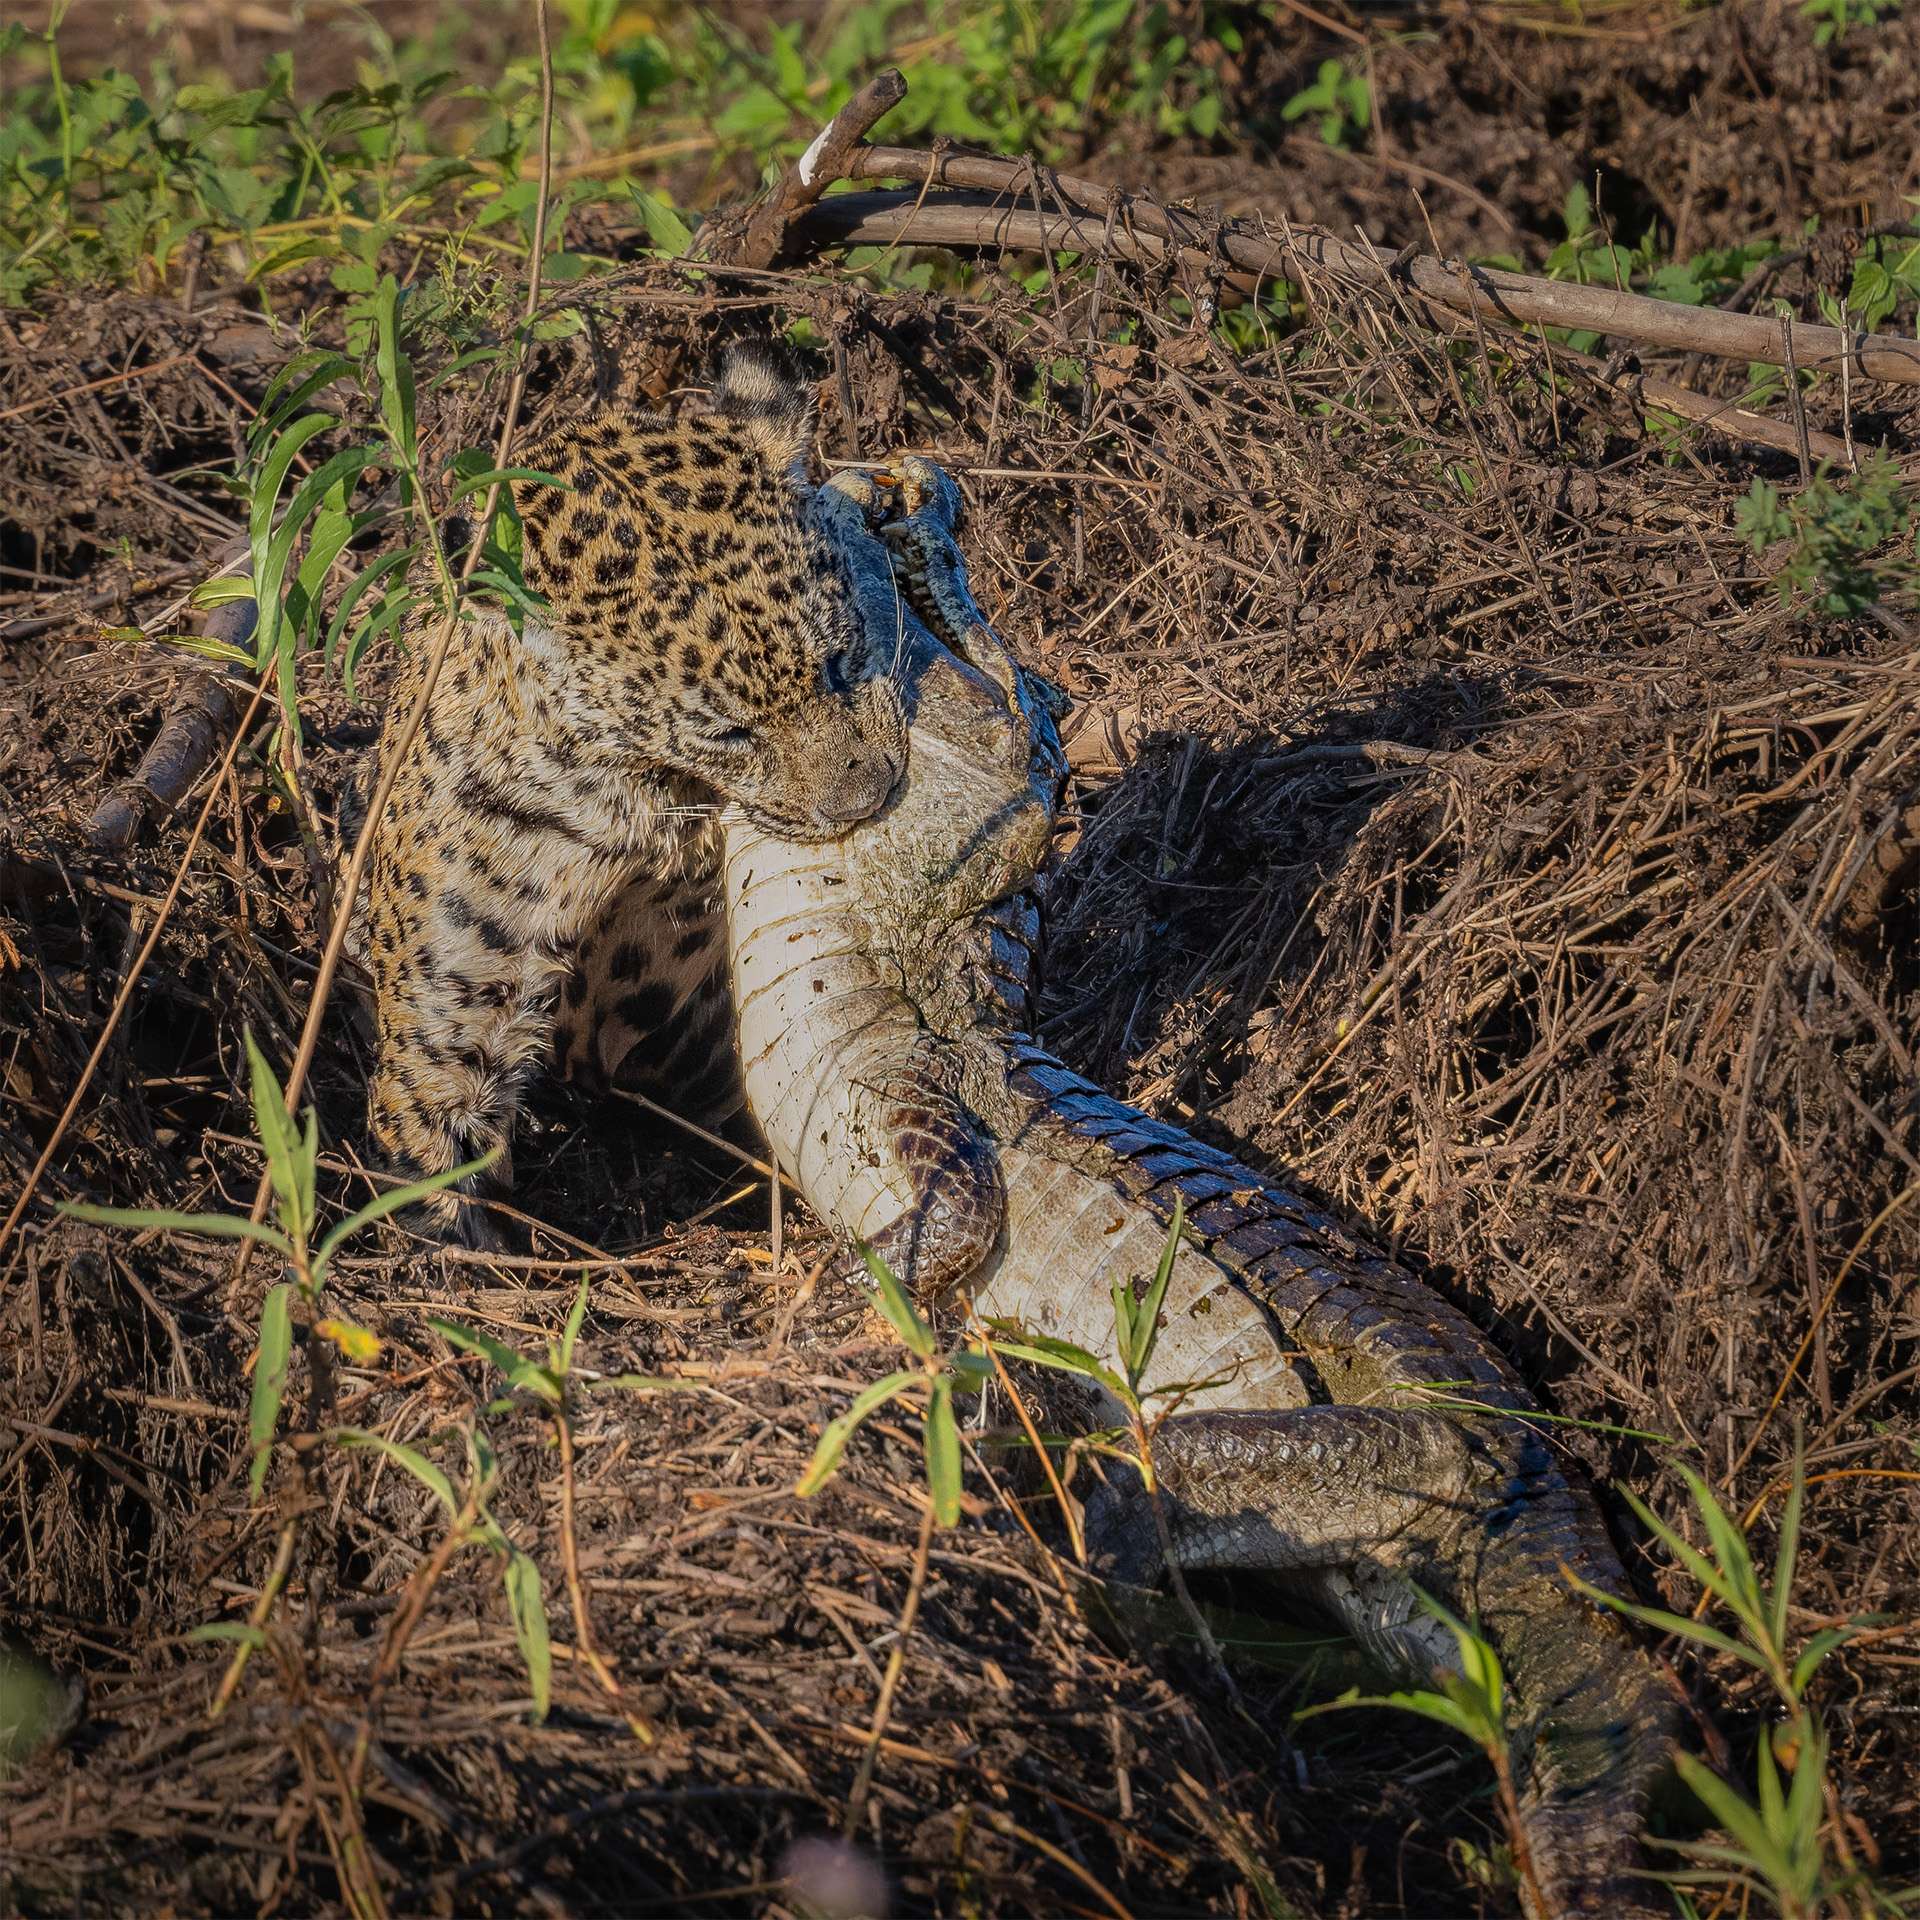 Jaguar Successful Hunt for a Caimnan Northern Pantanal on a tributary of the Cuiaba River